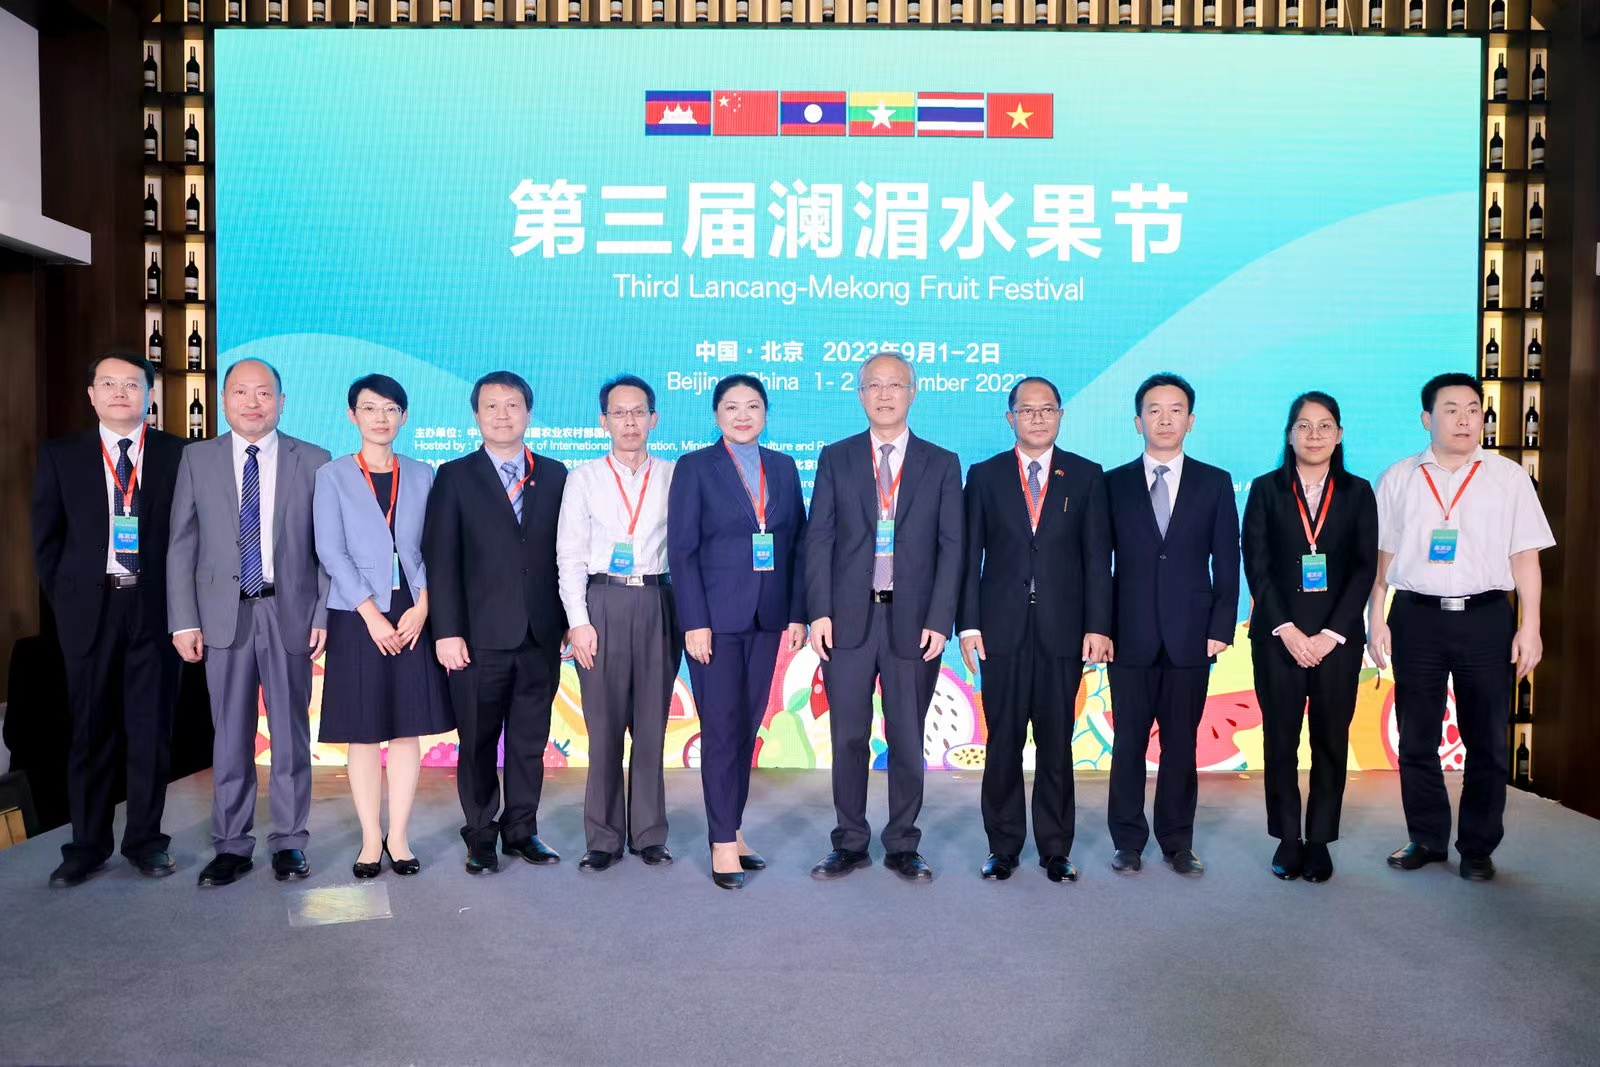 The ACC Attends the Third Lancang-Mekong Fruit Festival